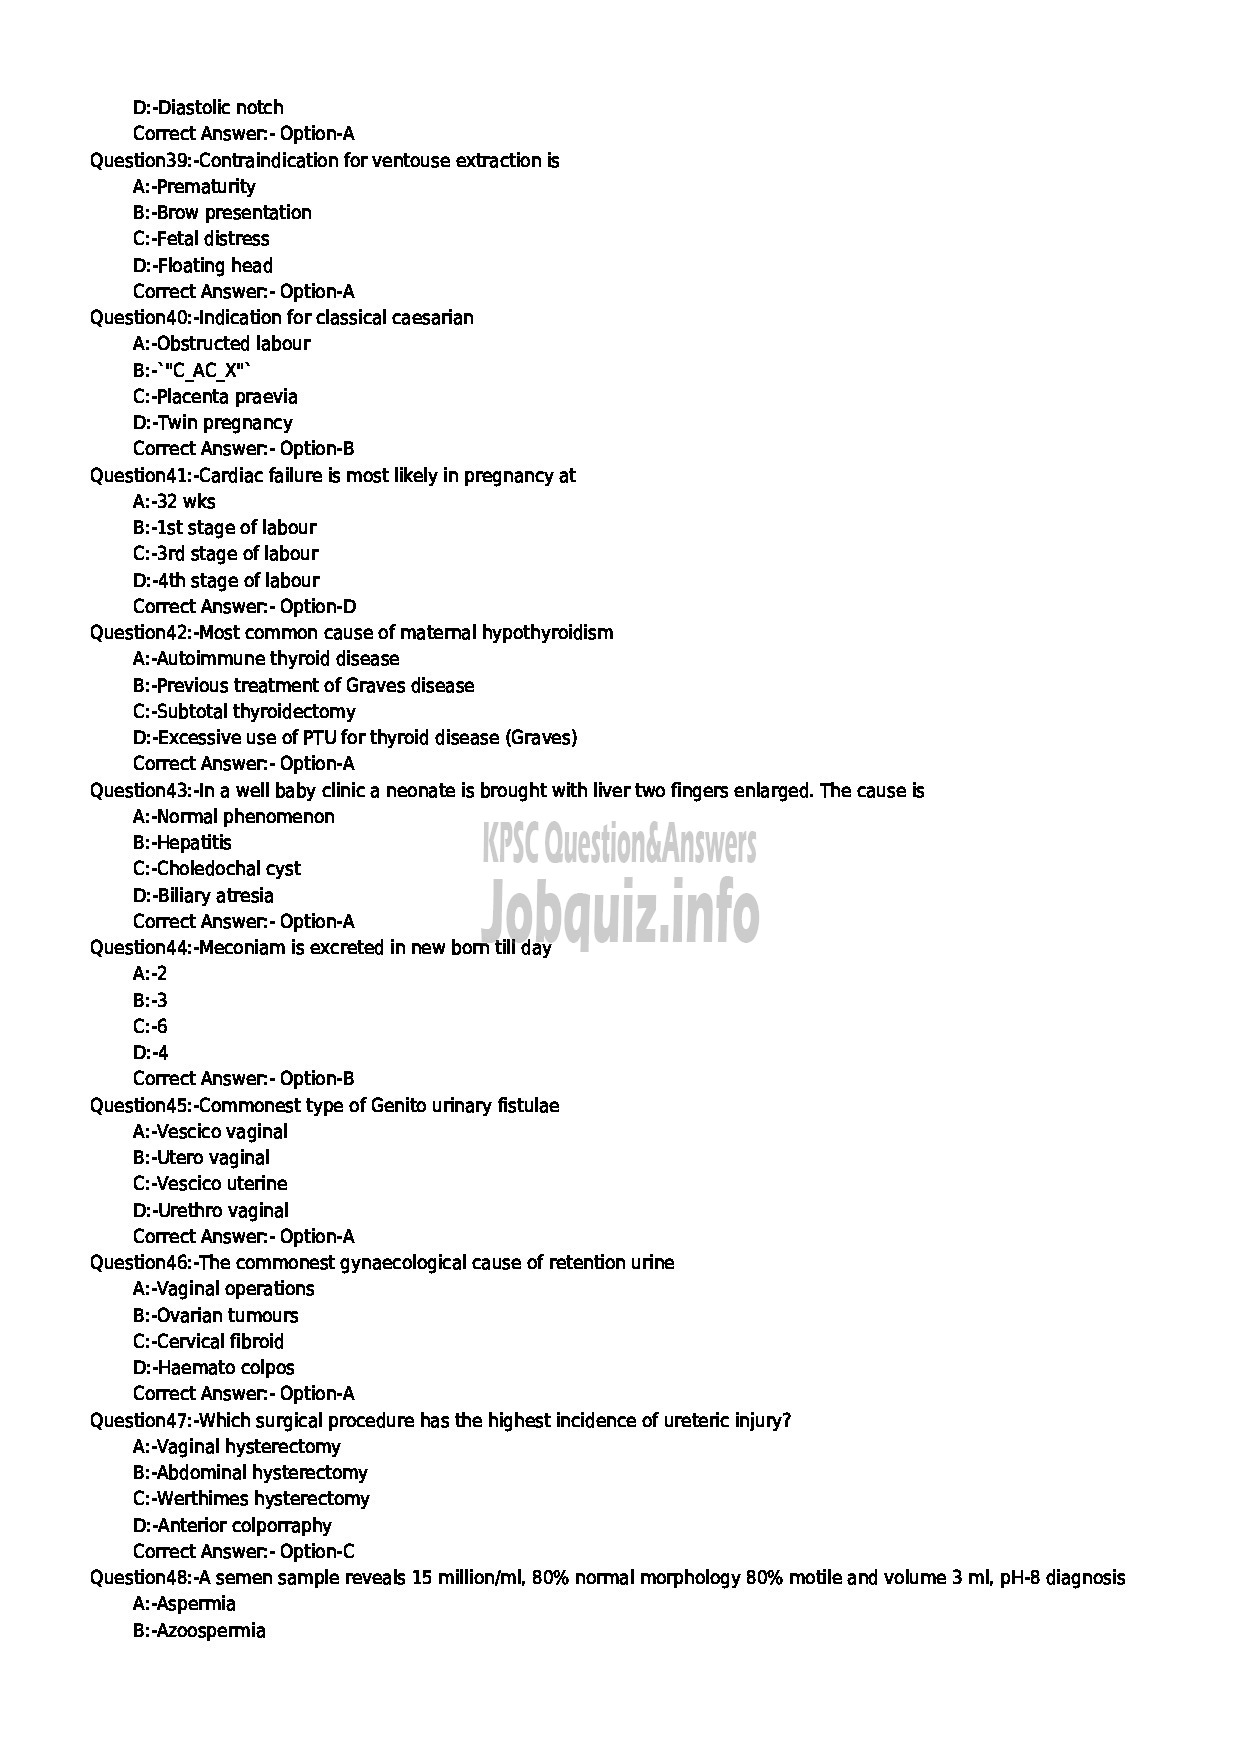 Kerala PSC Question Paper - SENIOR LECTURER IN OBTETRICS AND GYNAECOLOGY MEDICAL EDUCATION-5